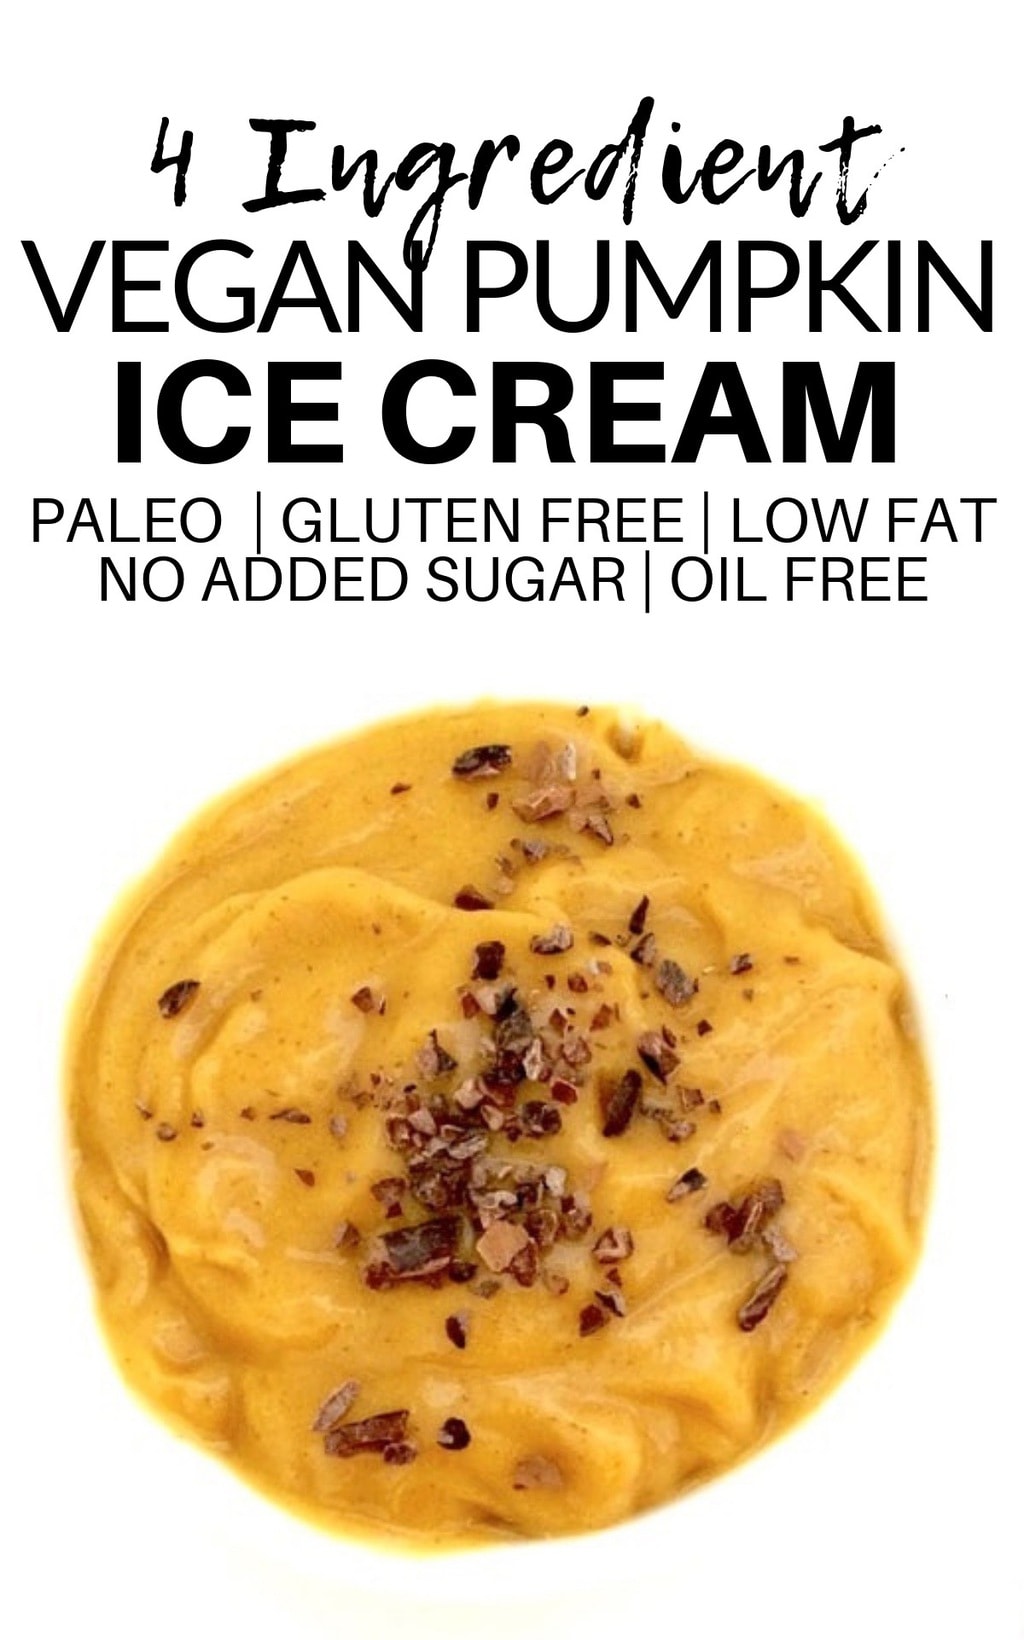 This healthy Vegan Pumpkin Ice Cream (aka "nice cream") is totally delicious and perfect for Fall! It's also paleo, gluten-free, and contains no added sugar. Only 4 ingredients, no churn & made in the blender!